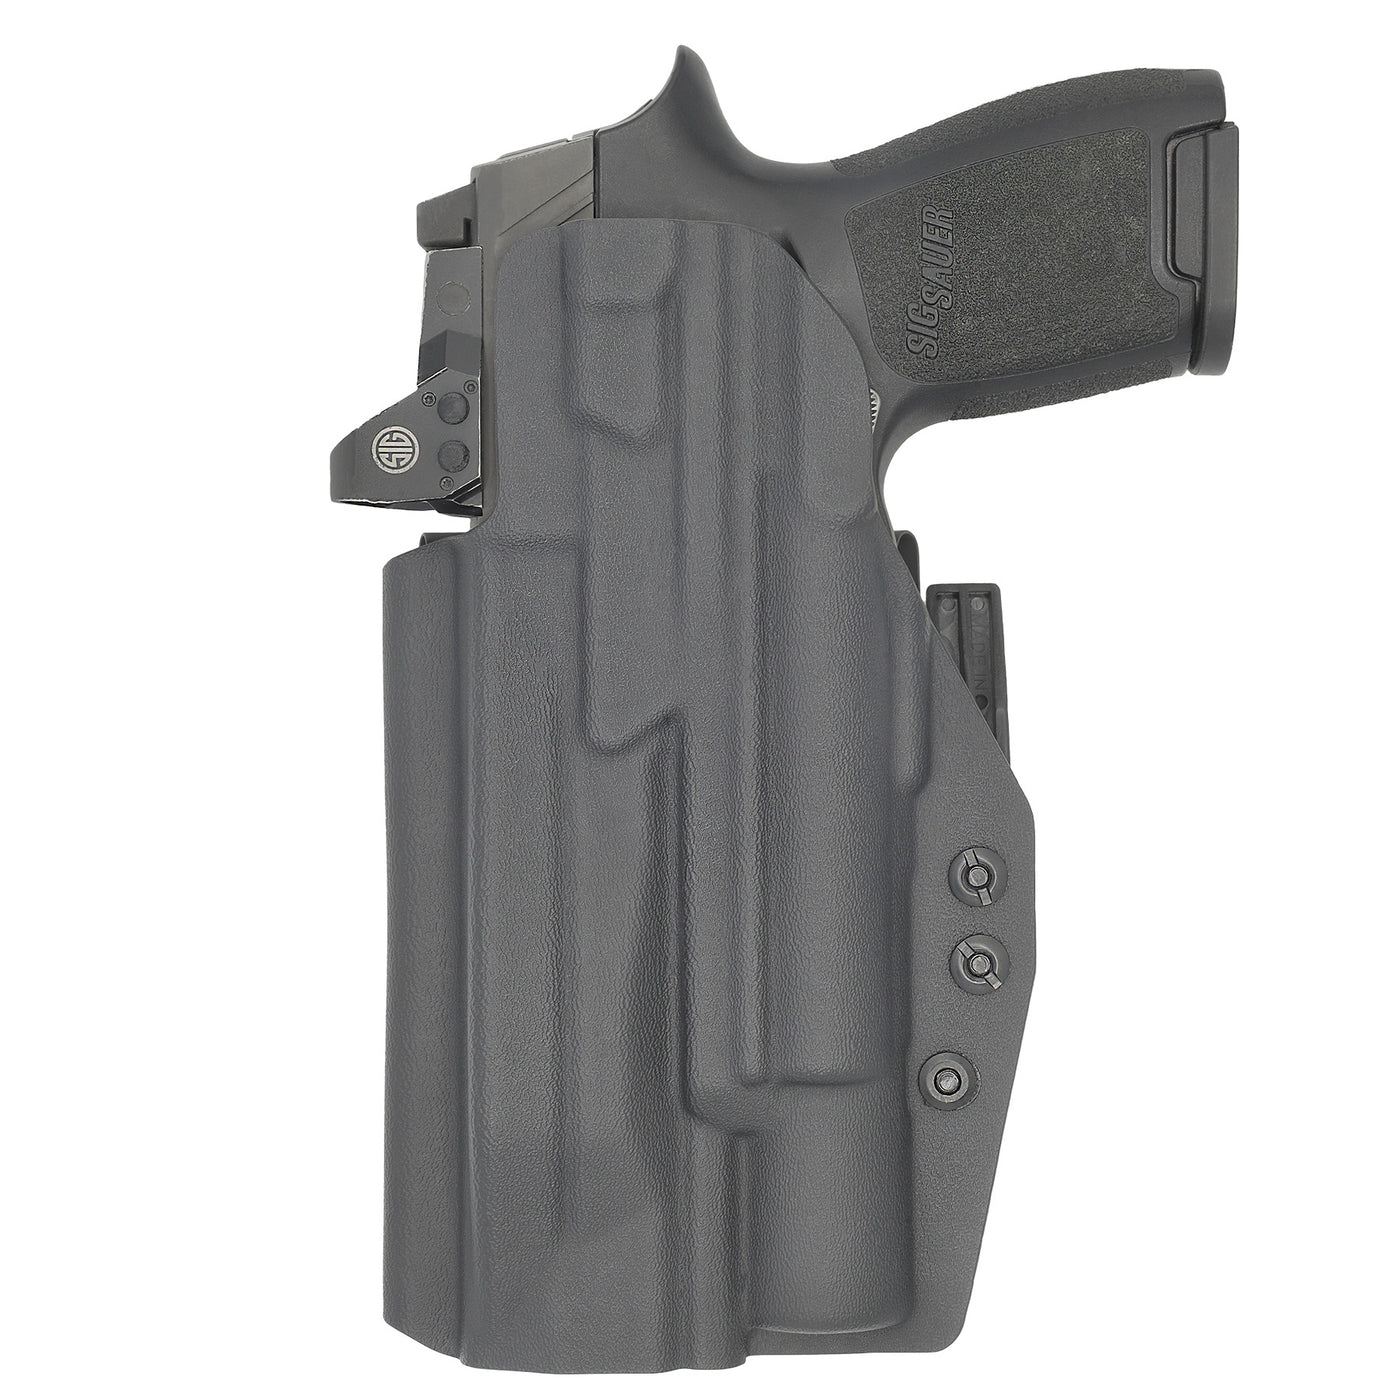 C&G Holsters quickship IWB ALPHA UPGRADE Tactical XDM Elite Surefire X300 in holstered position back view